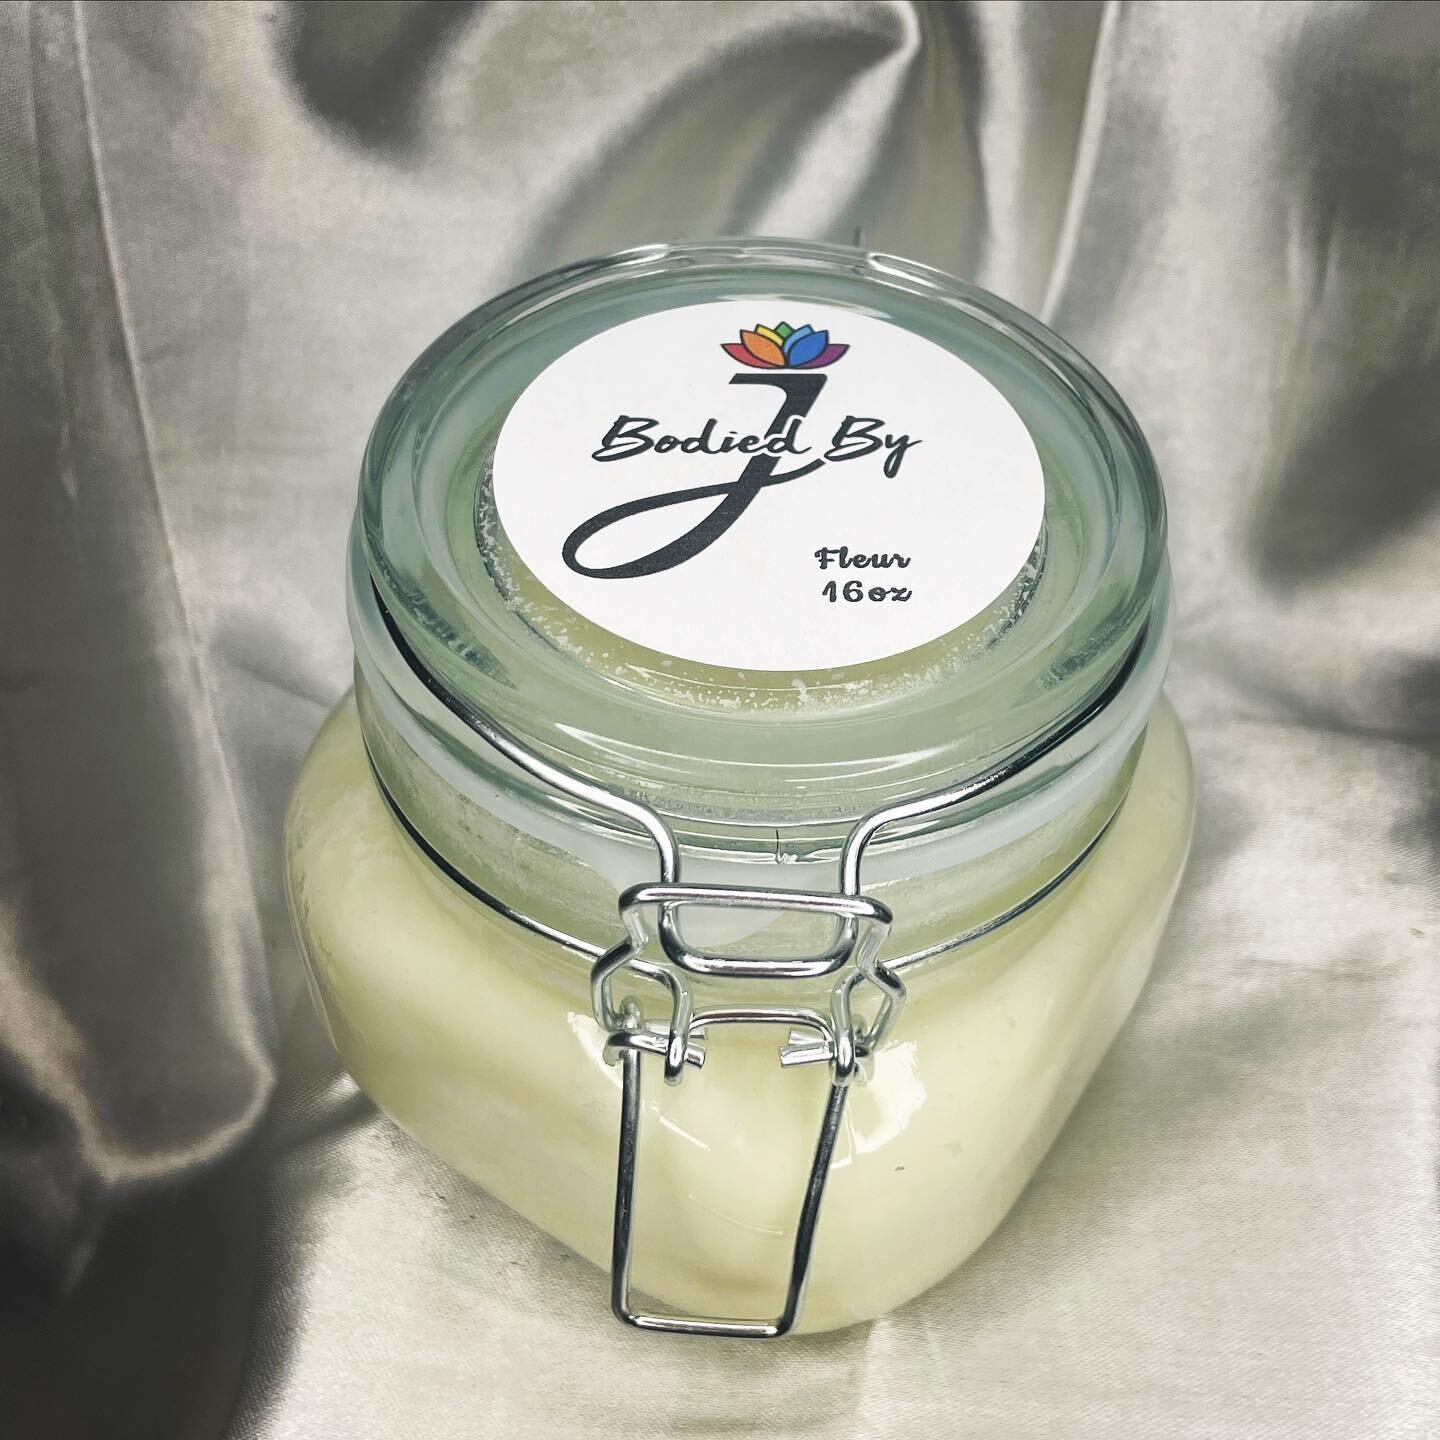 Fleur (flower) is personally my favorite scent! &amp; glad to see it&rsquo;s one of y&rsquo;all&rsquo;s favorites as well! 

These giant jars will be available TODAY for our last day of our sale! Use Code: AUG20 for the discount